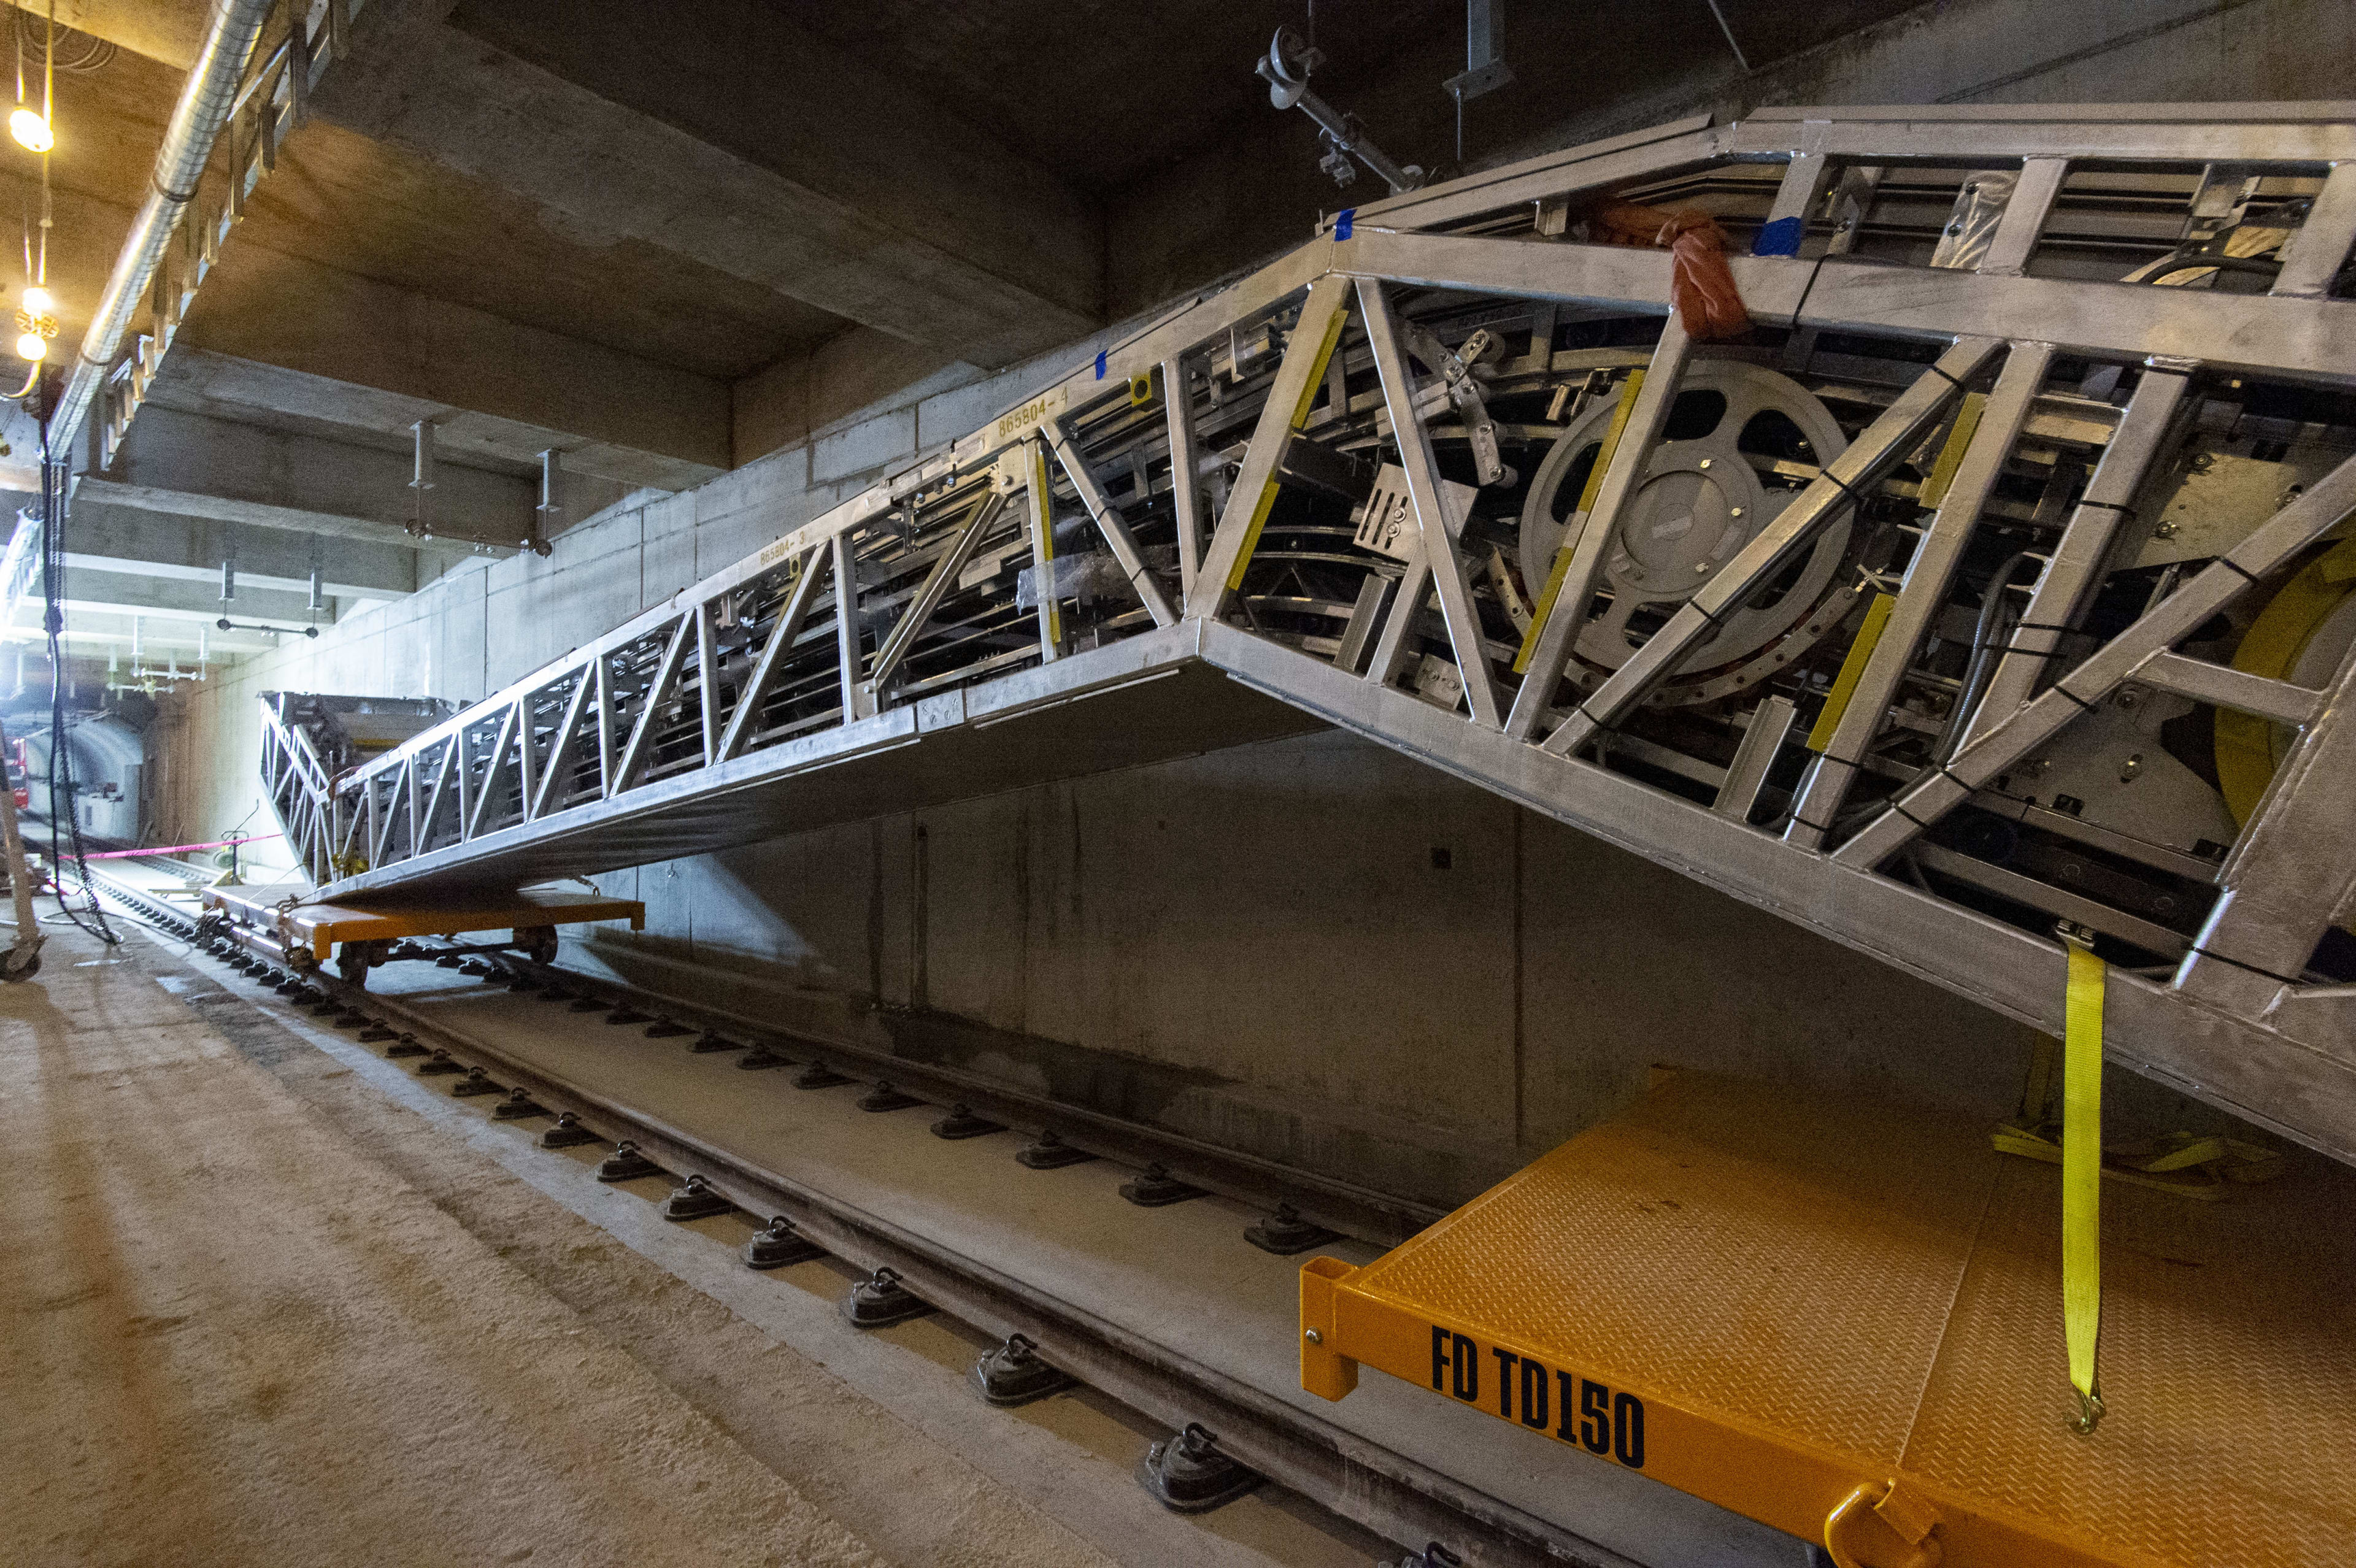 A large escalator sits on two small rail cars, inside the LRT tunnel.